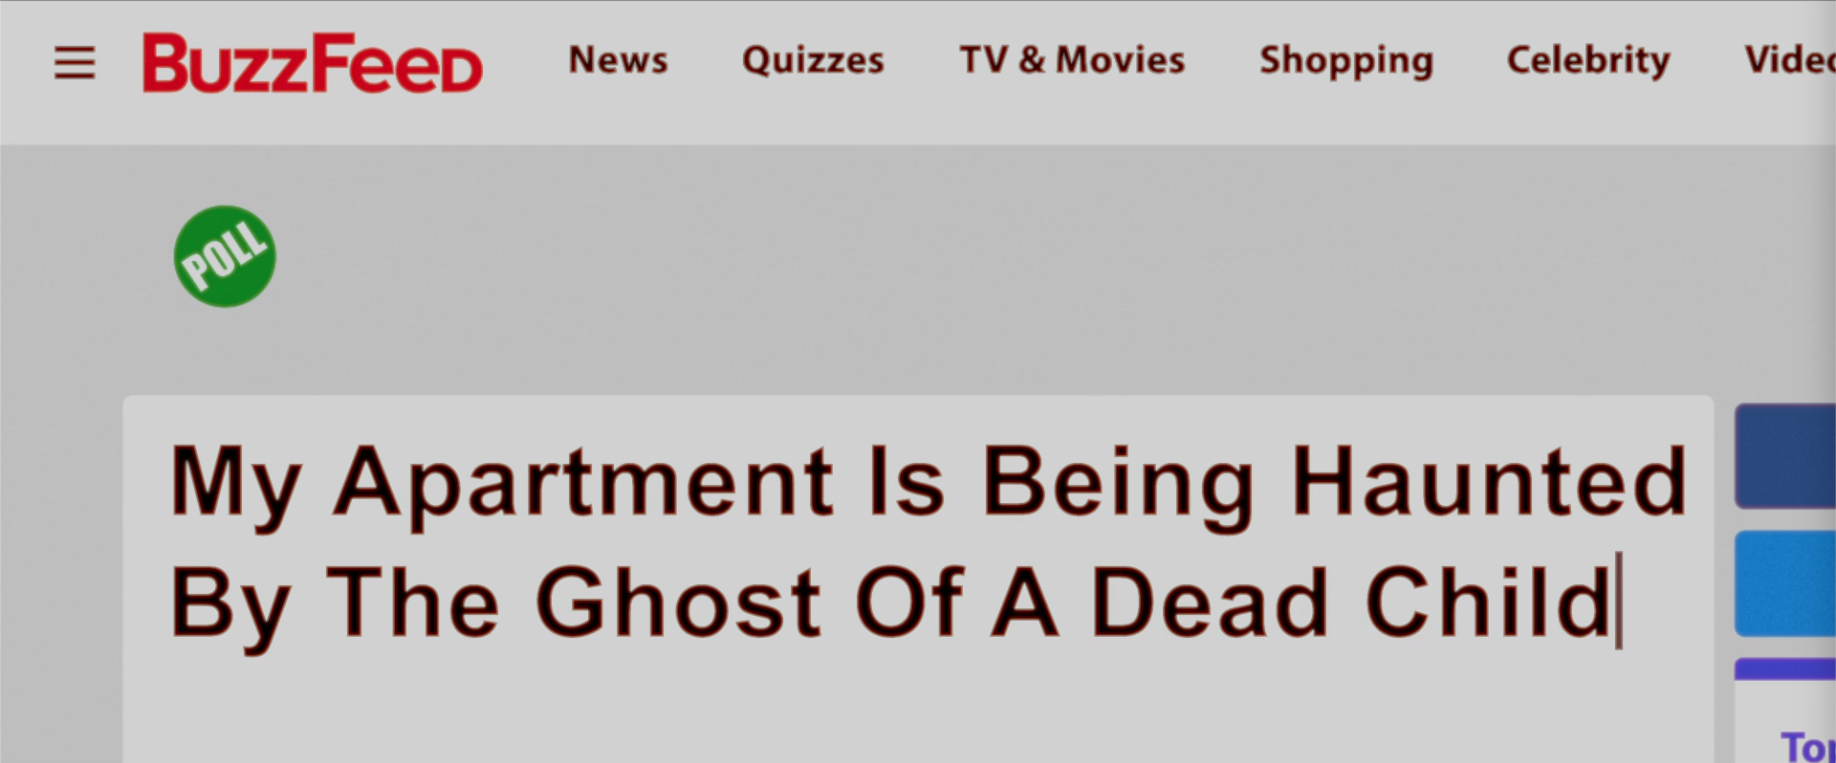 BuzzFeed headline: My Apartment Is Being Haunted By The Ghost Of A Dead Child